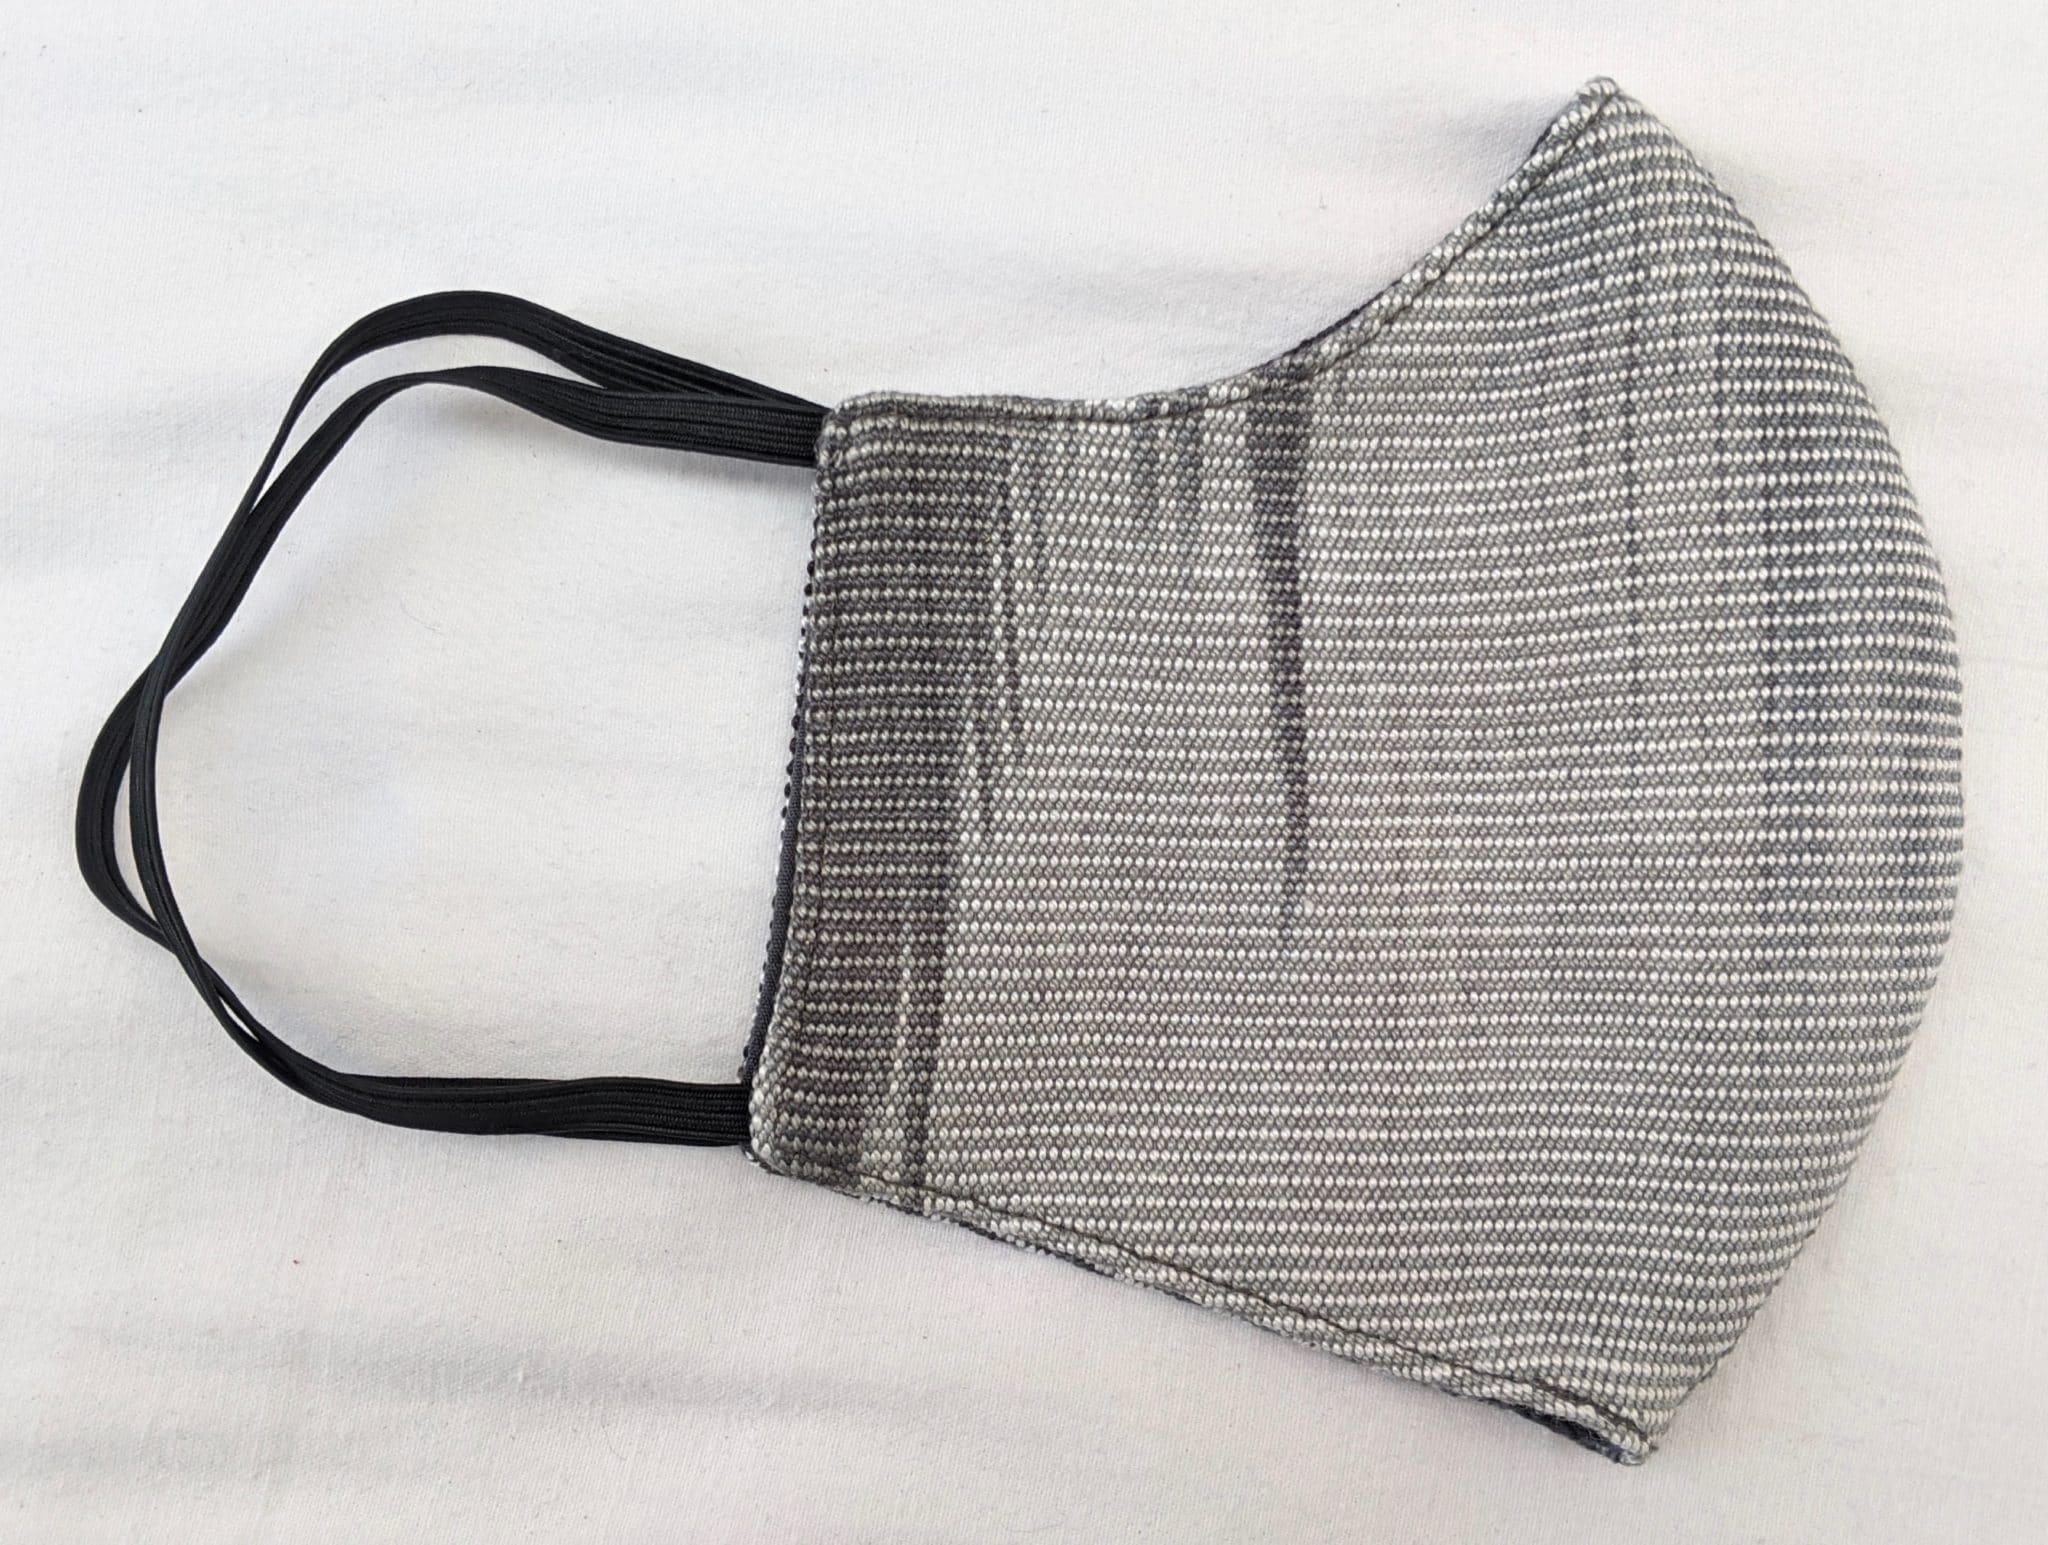 Handwoven Lightweight Bamboo Face Mask with Metal at Bridge of Nose - Black, White, Grays